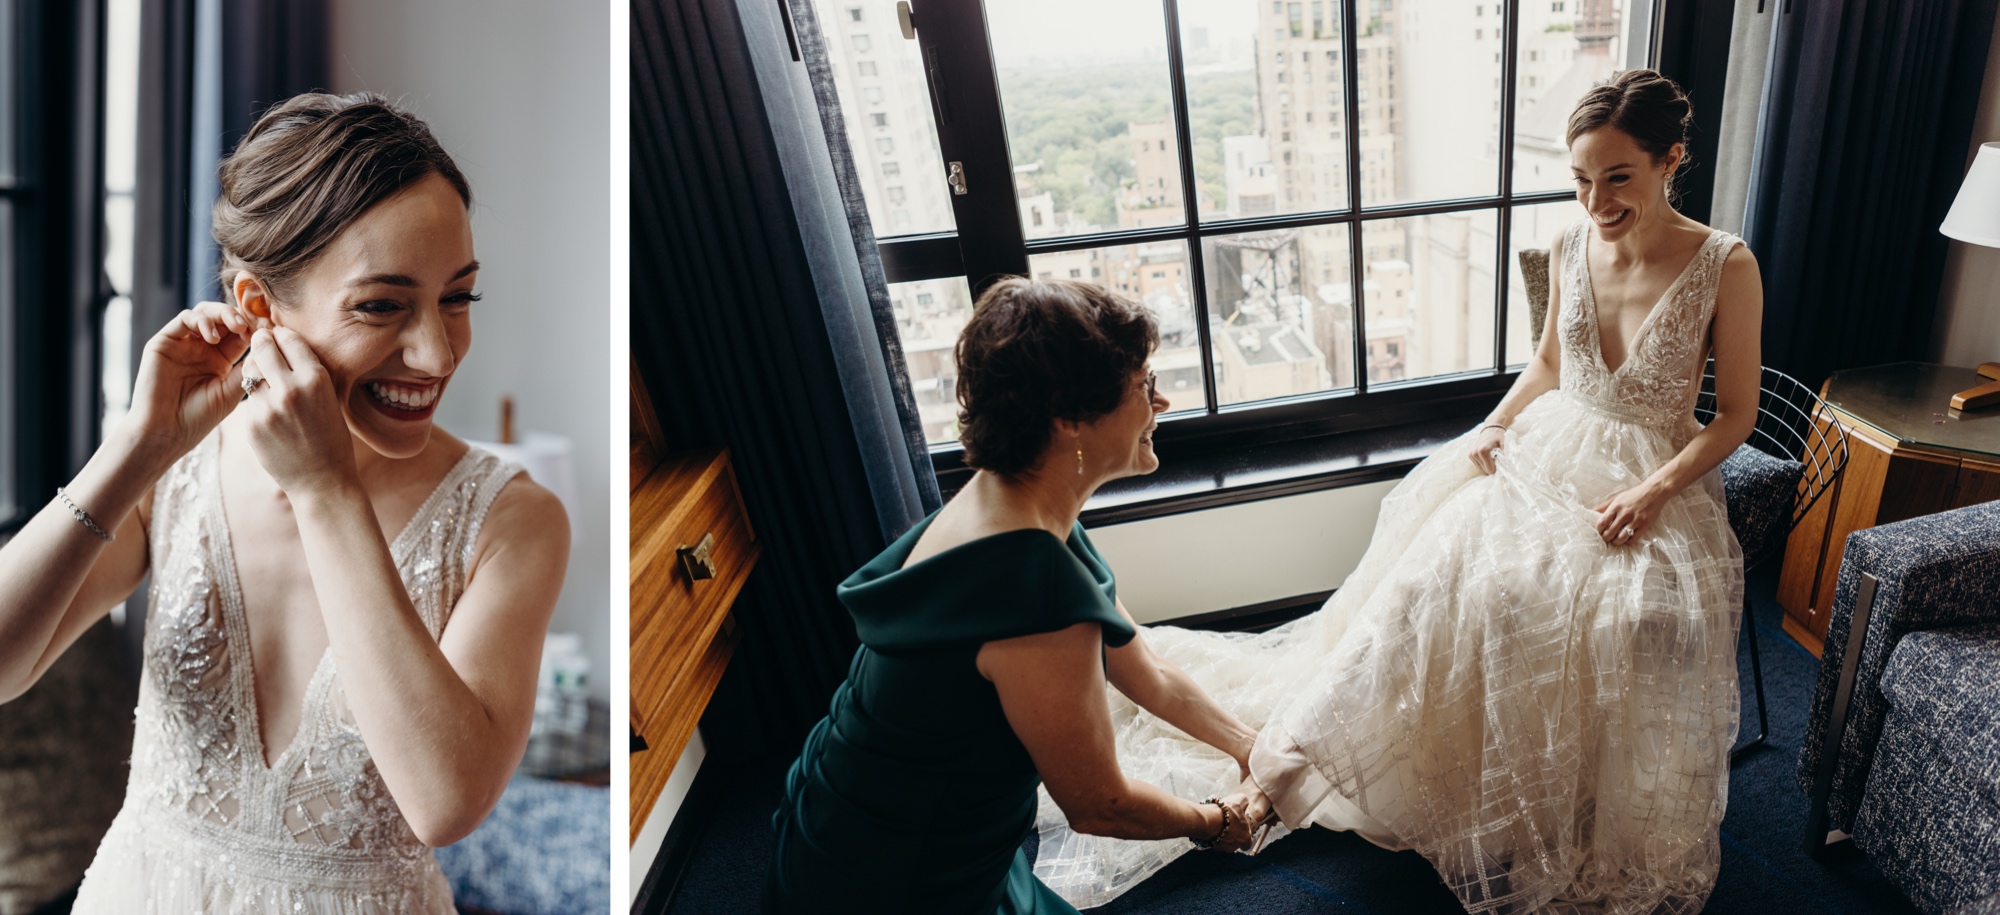 bride getting into her wedding dress and putting earrings on at le parker meridien in new york city